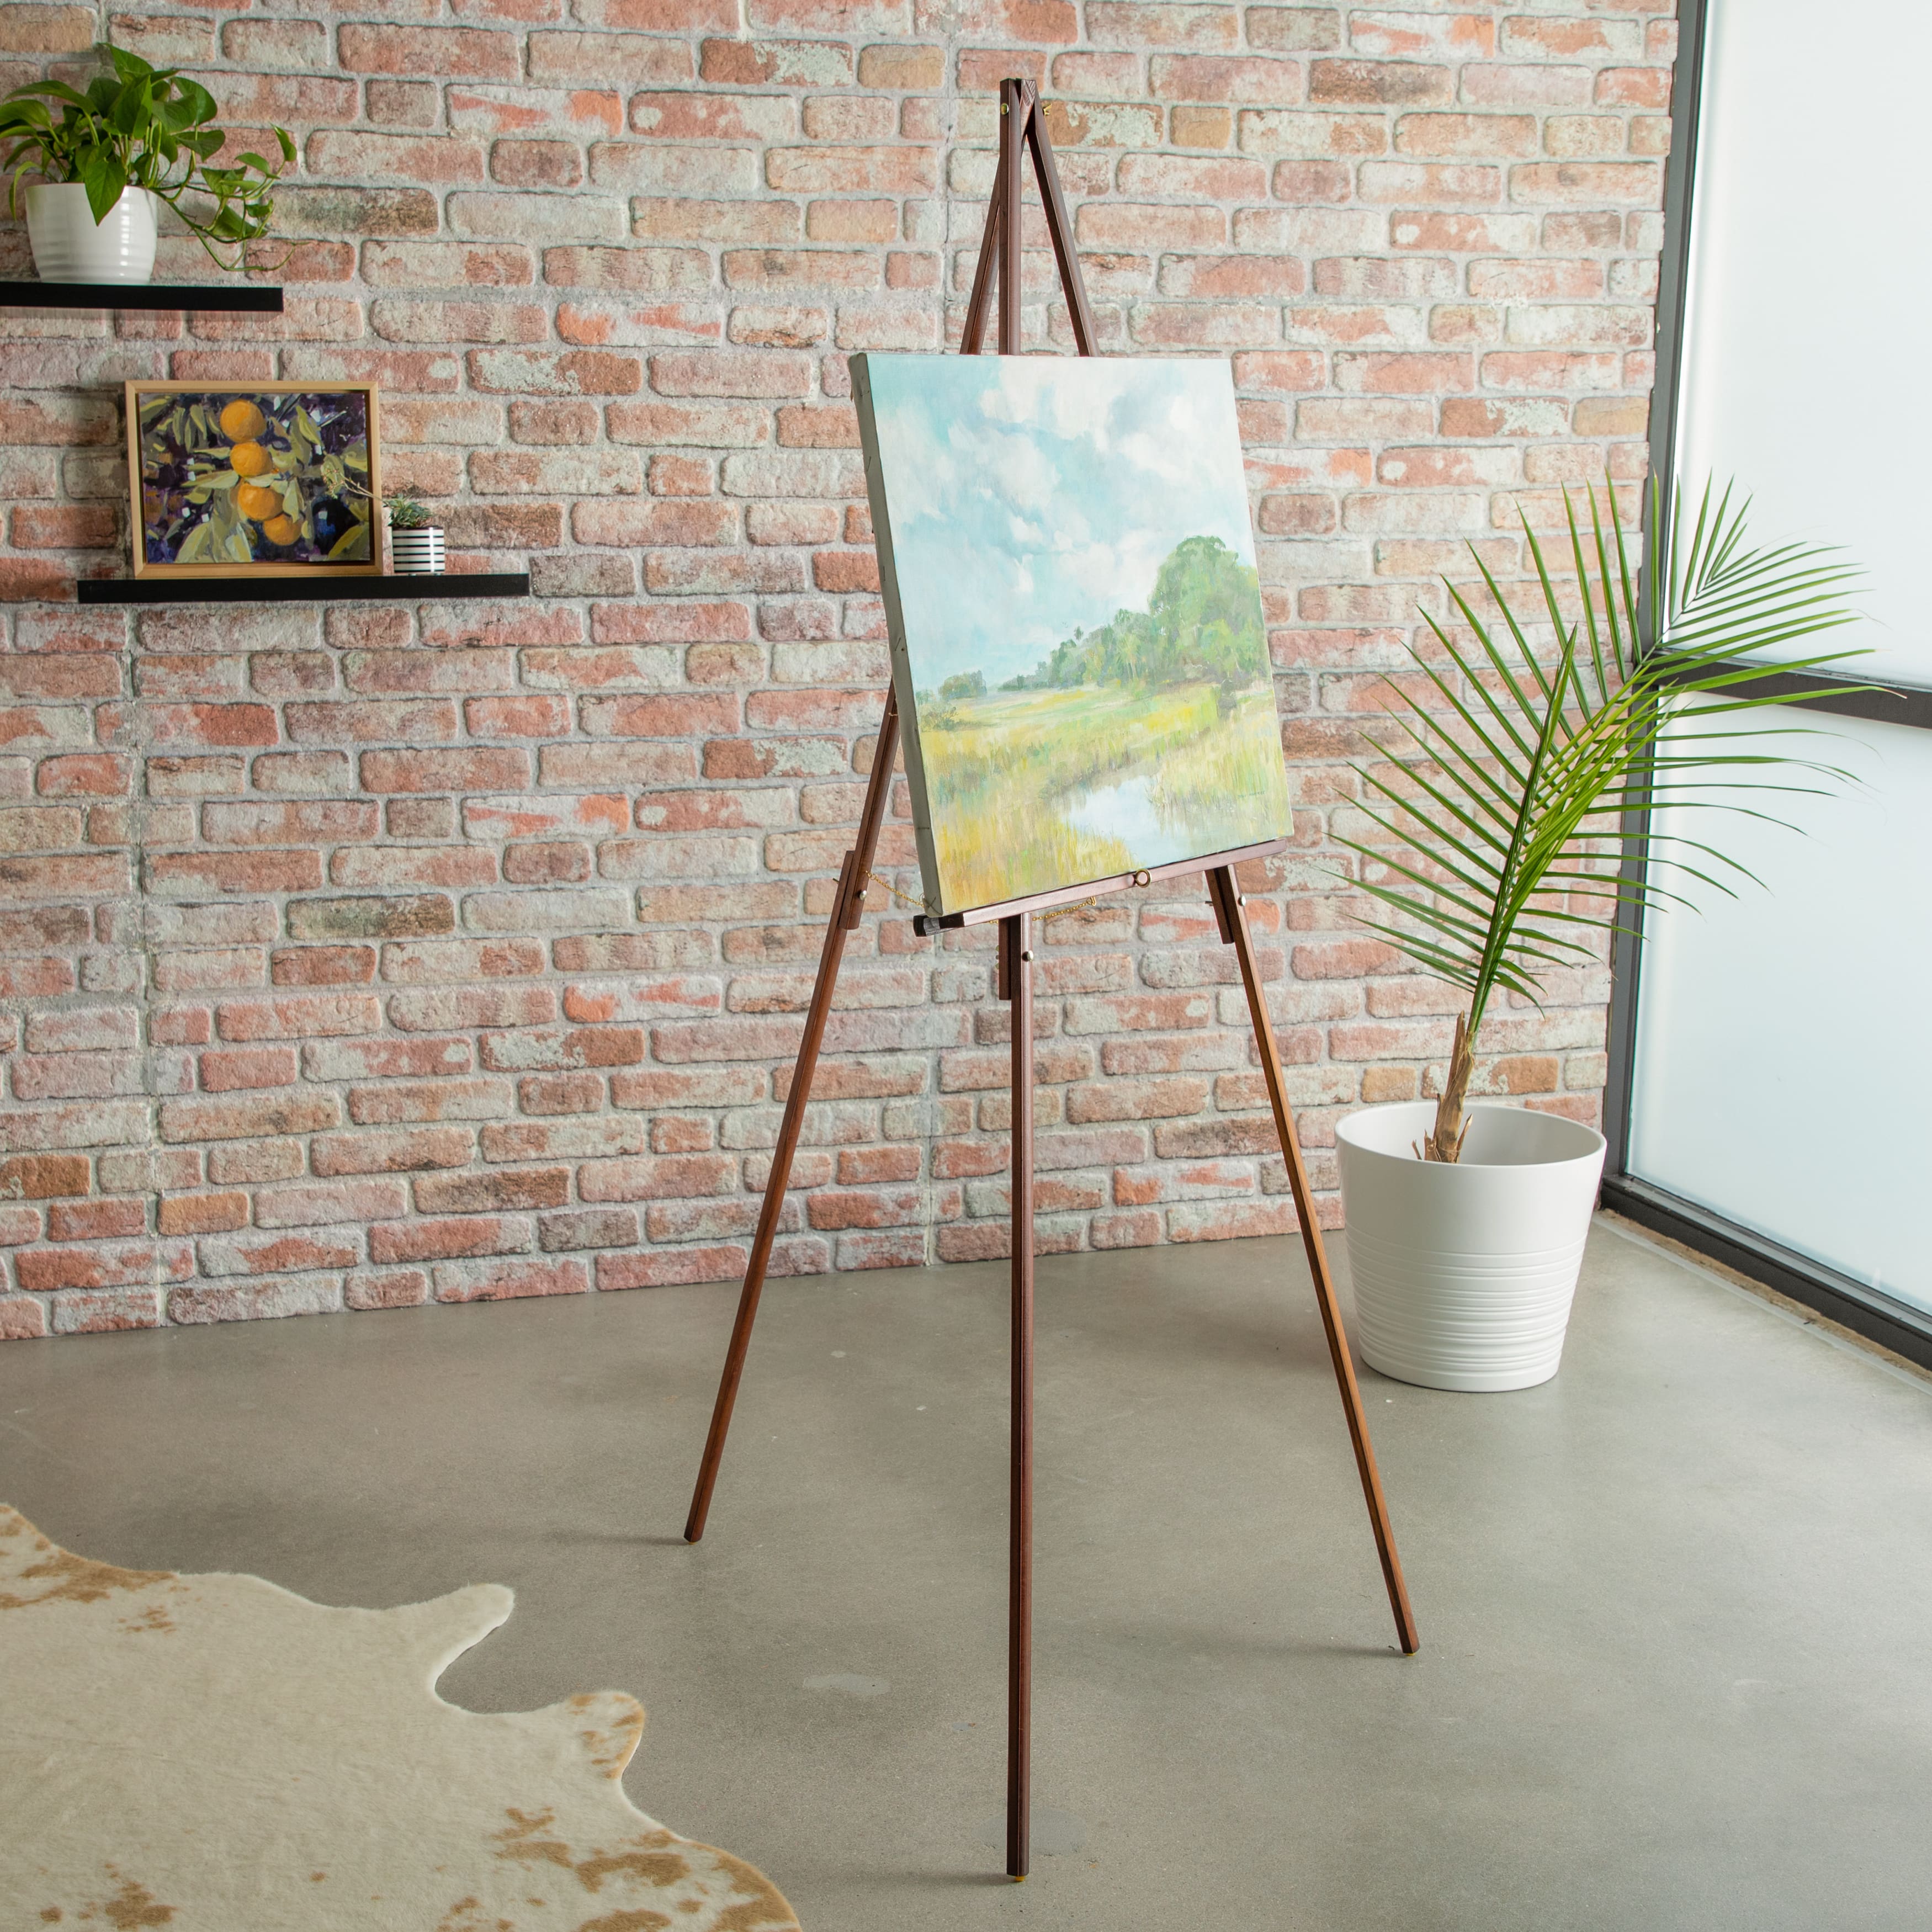 New Release: Retro Tripod Art Display Stand by [satus Inc]